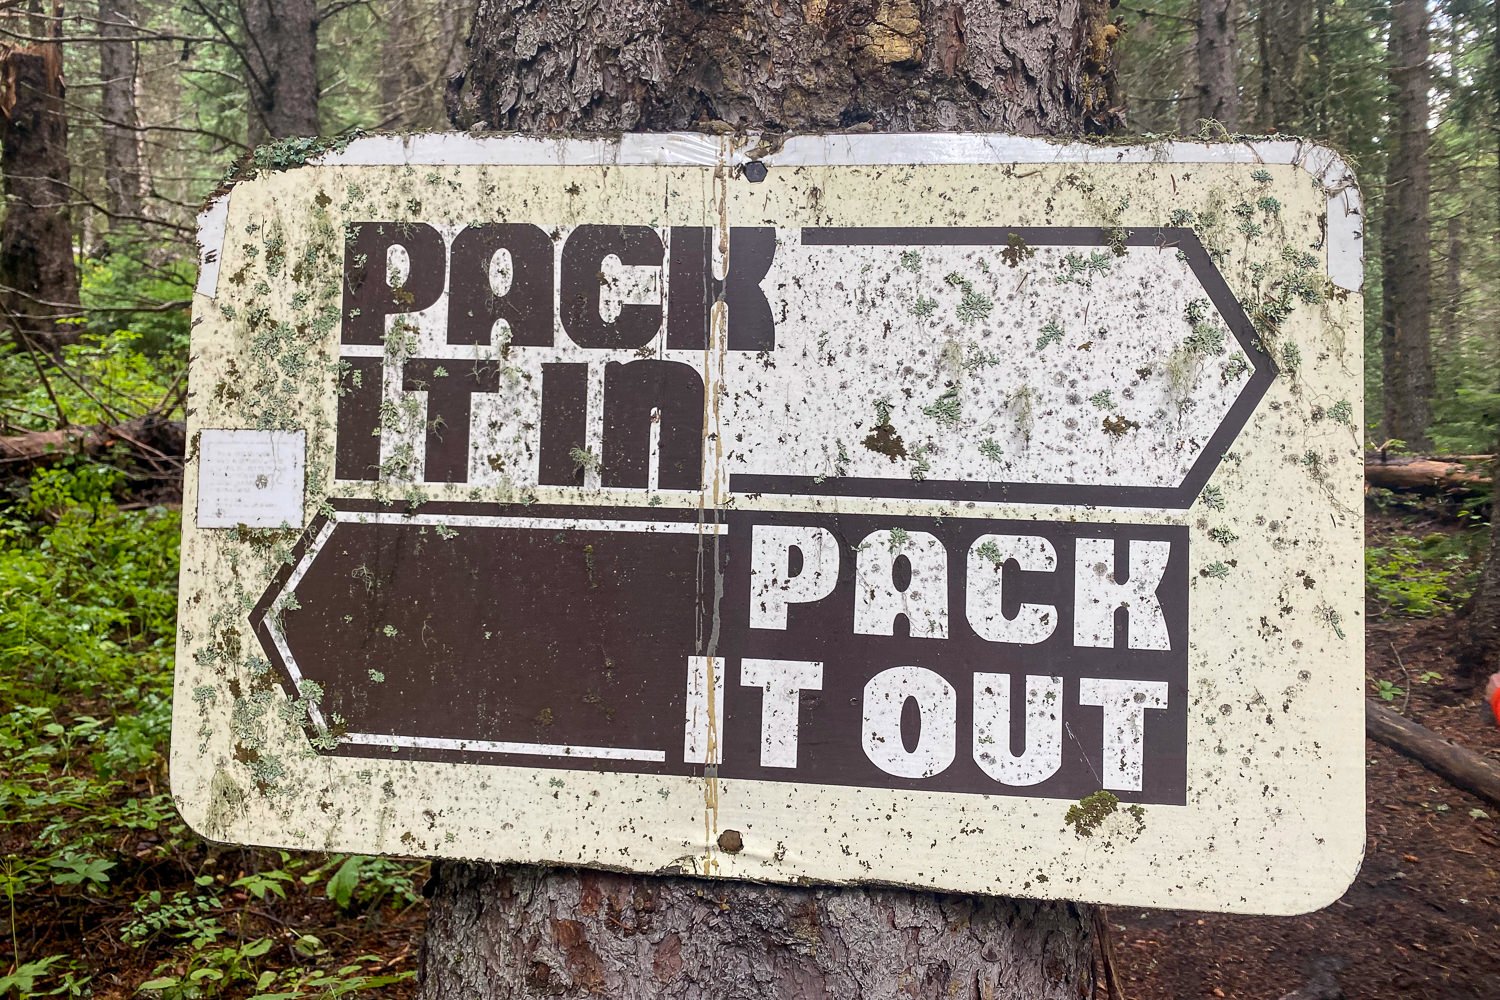 A Pack It In Pack It Out sign on a tree